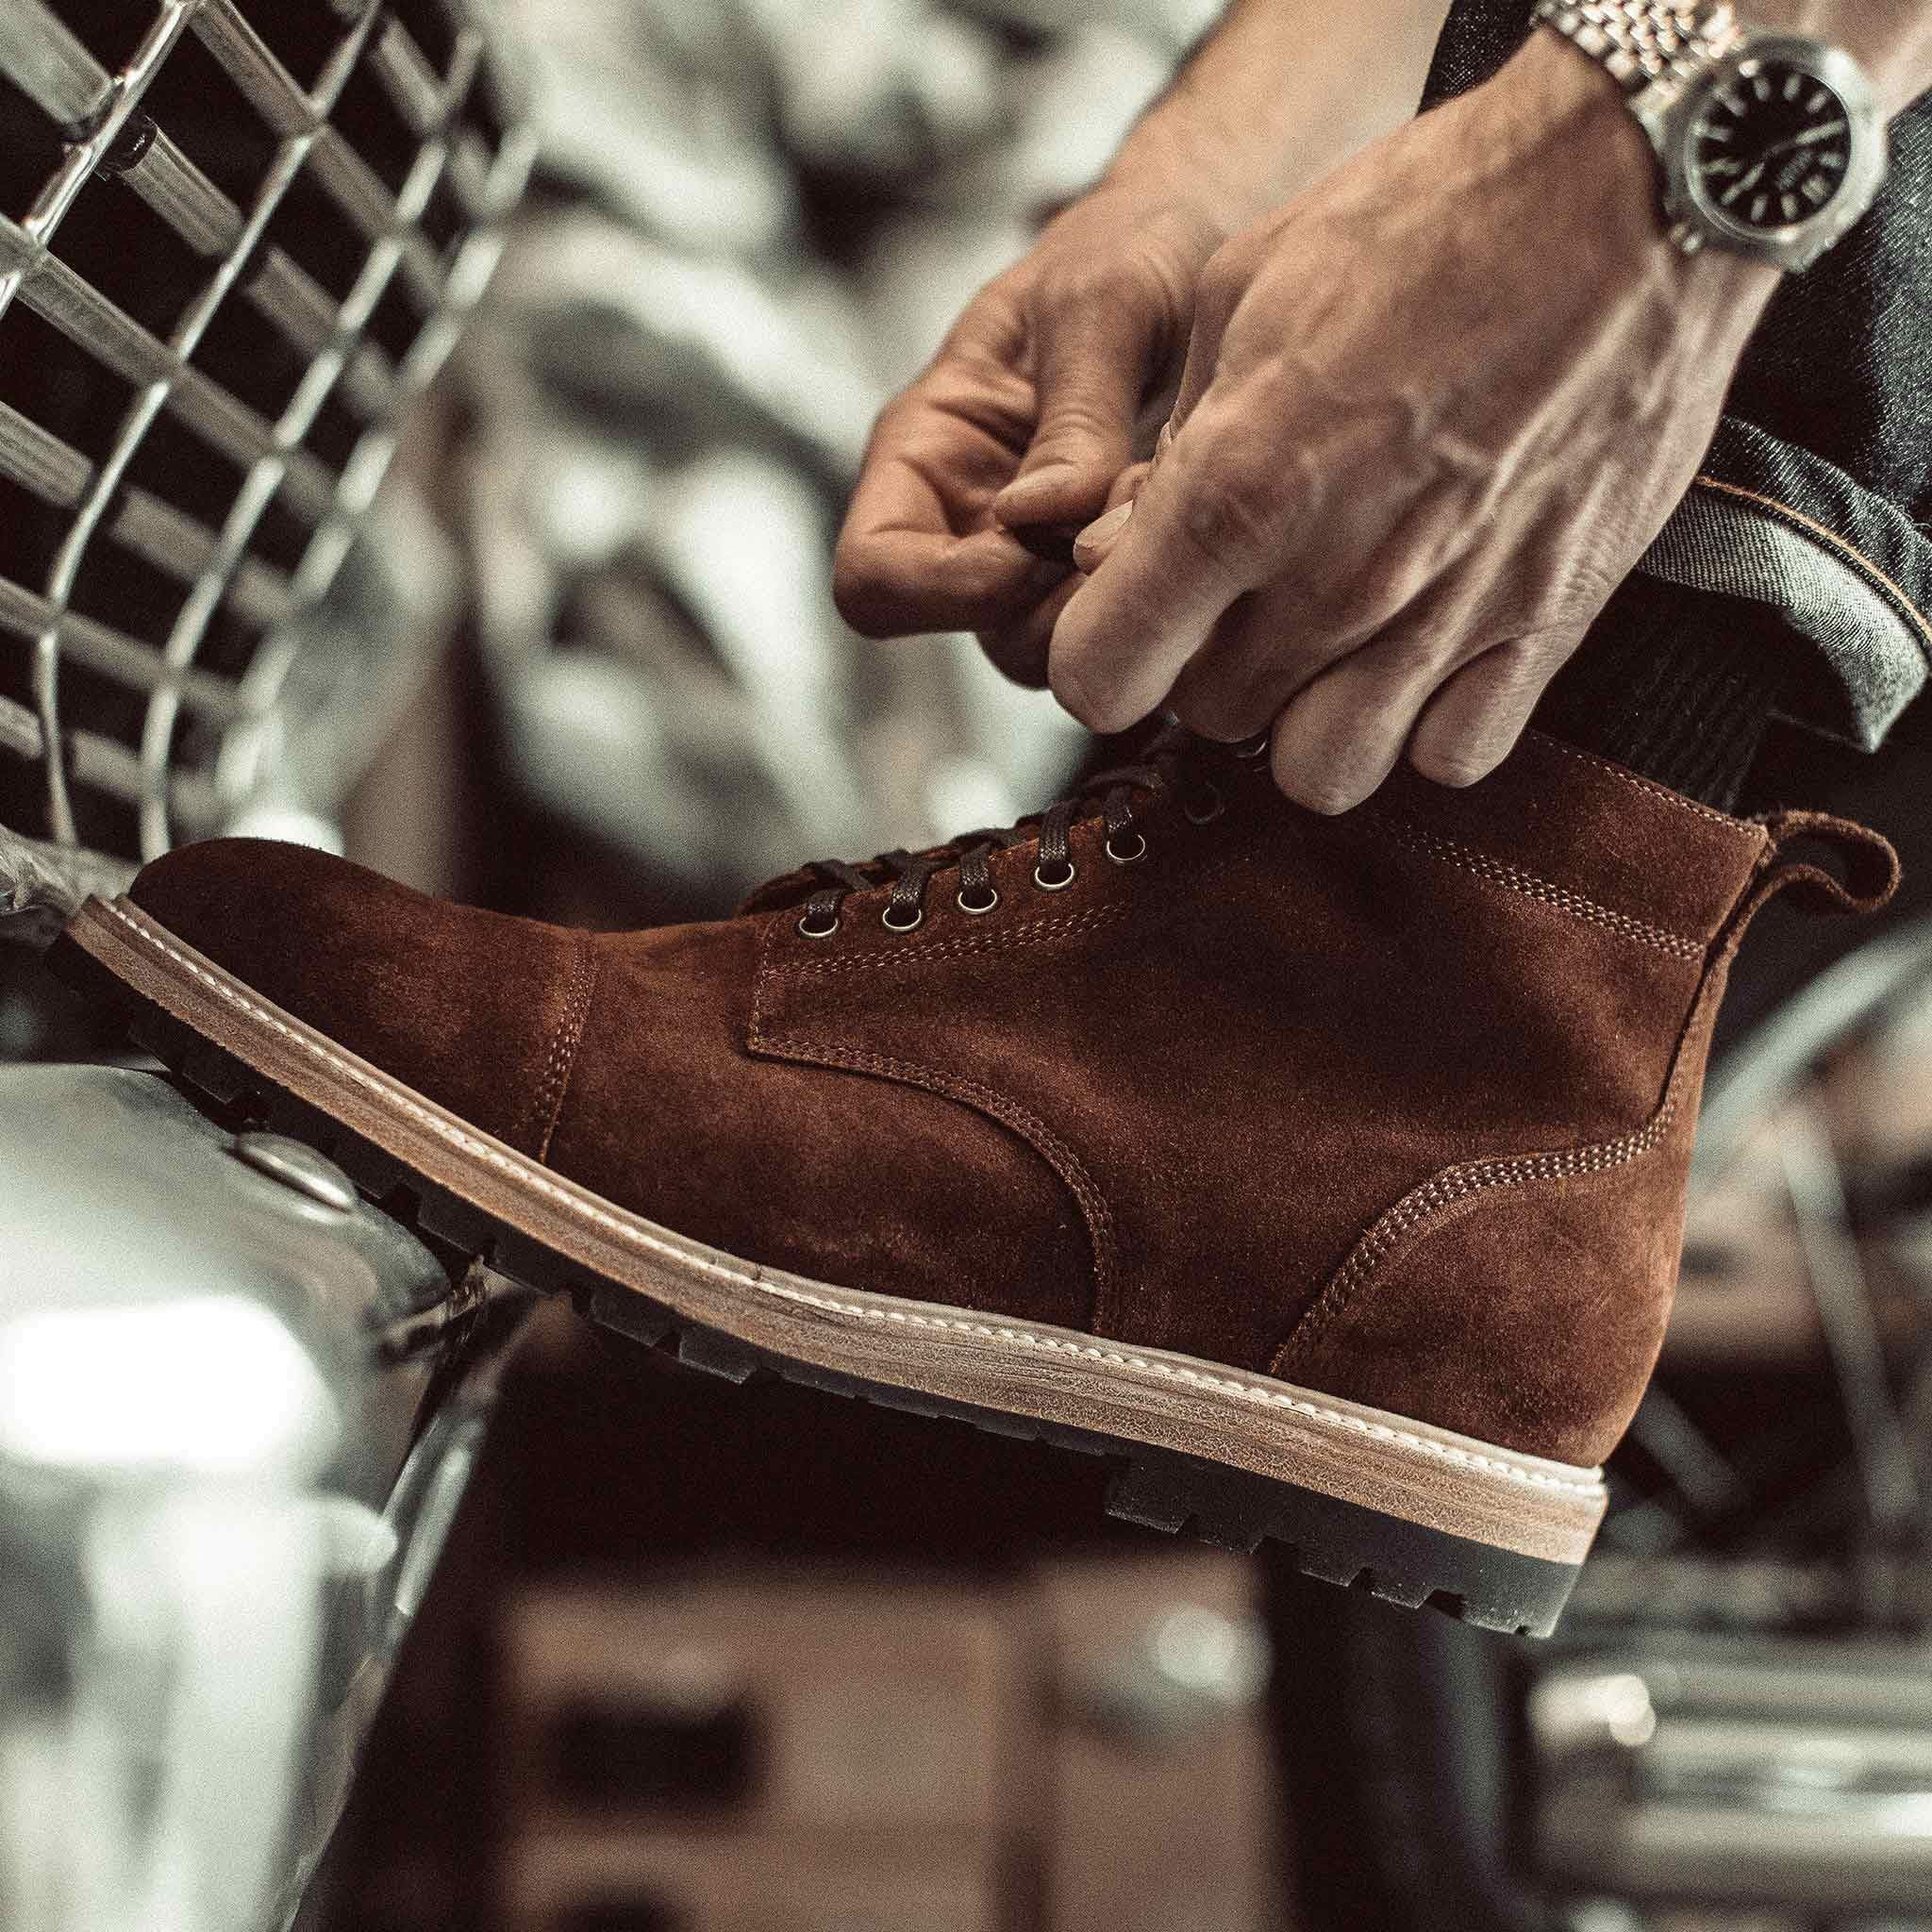 The 7 Best Work Boots You Can Buy